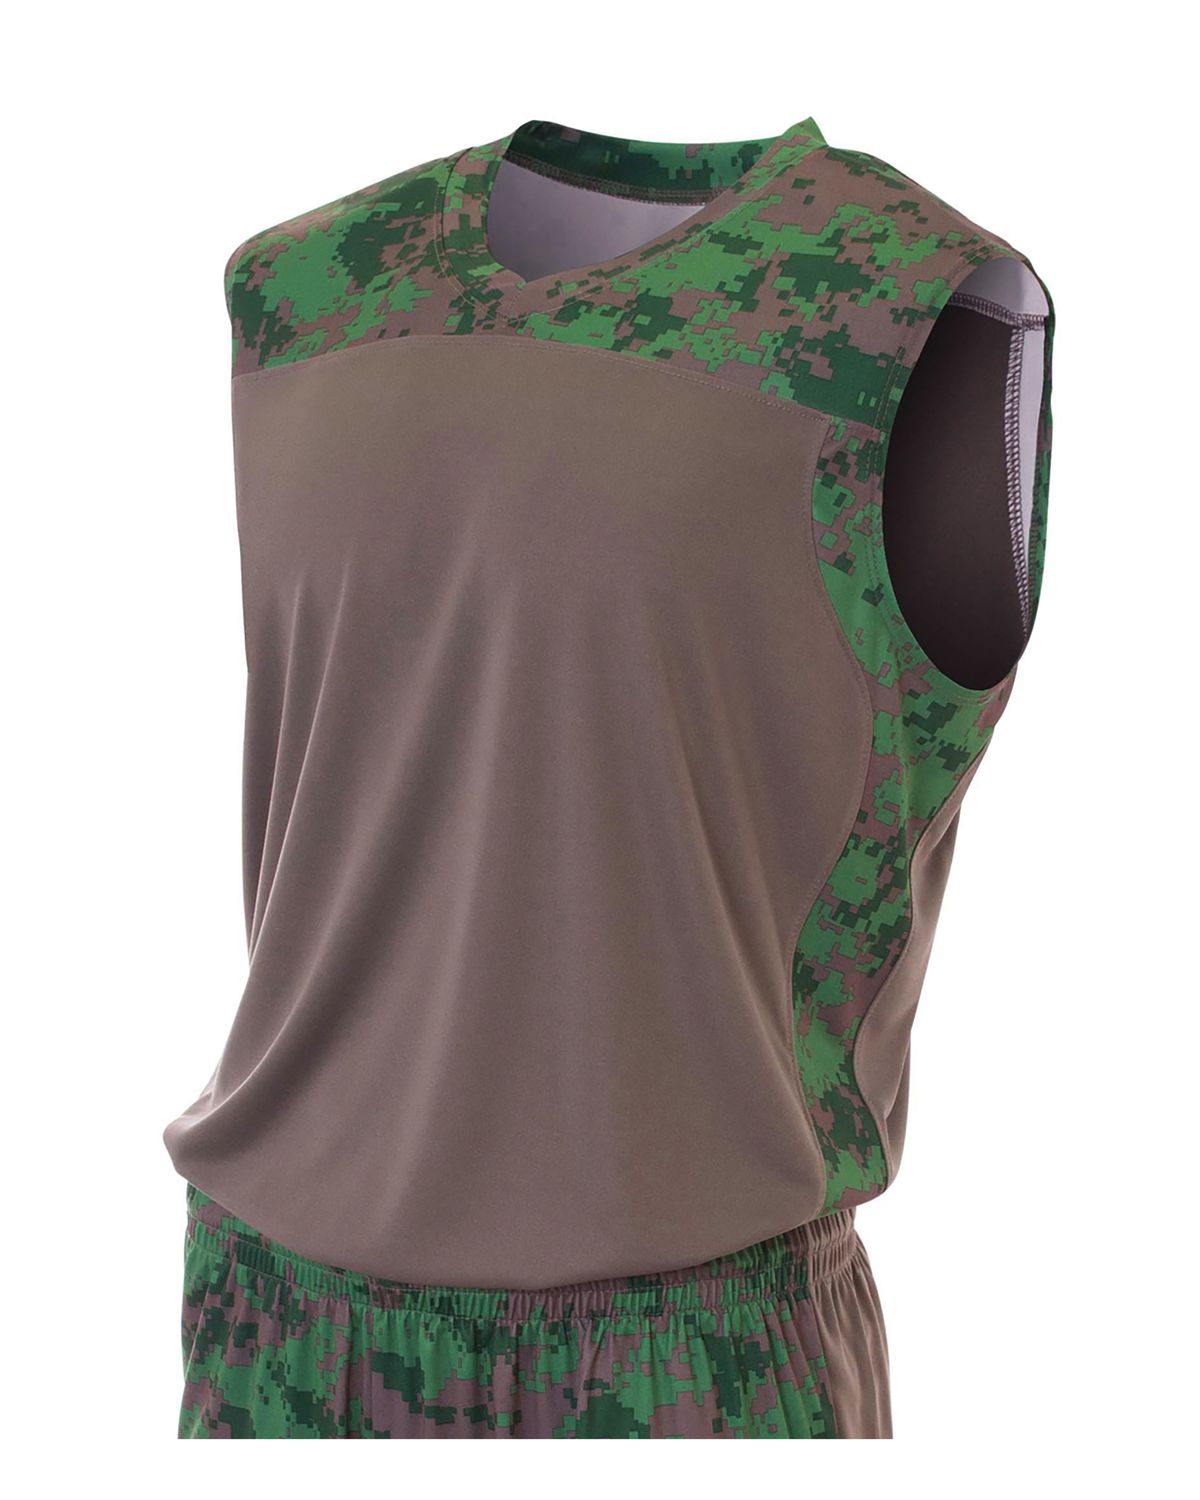 'A4 NB2345 Boy's Printed Camo Performance Muscle'